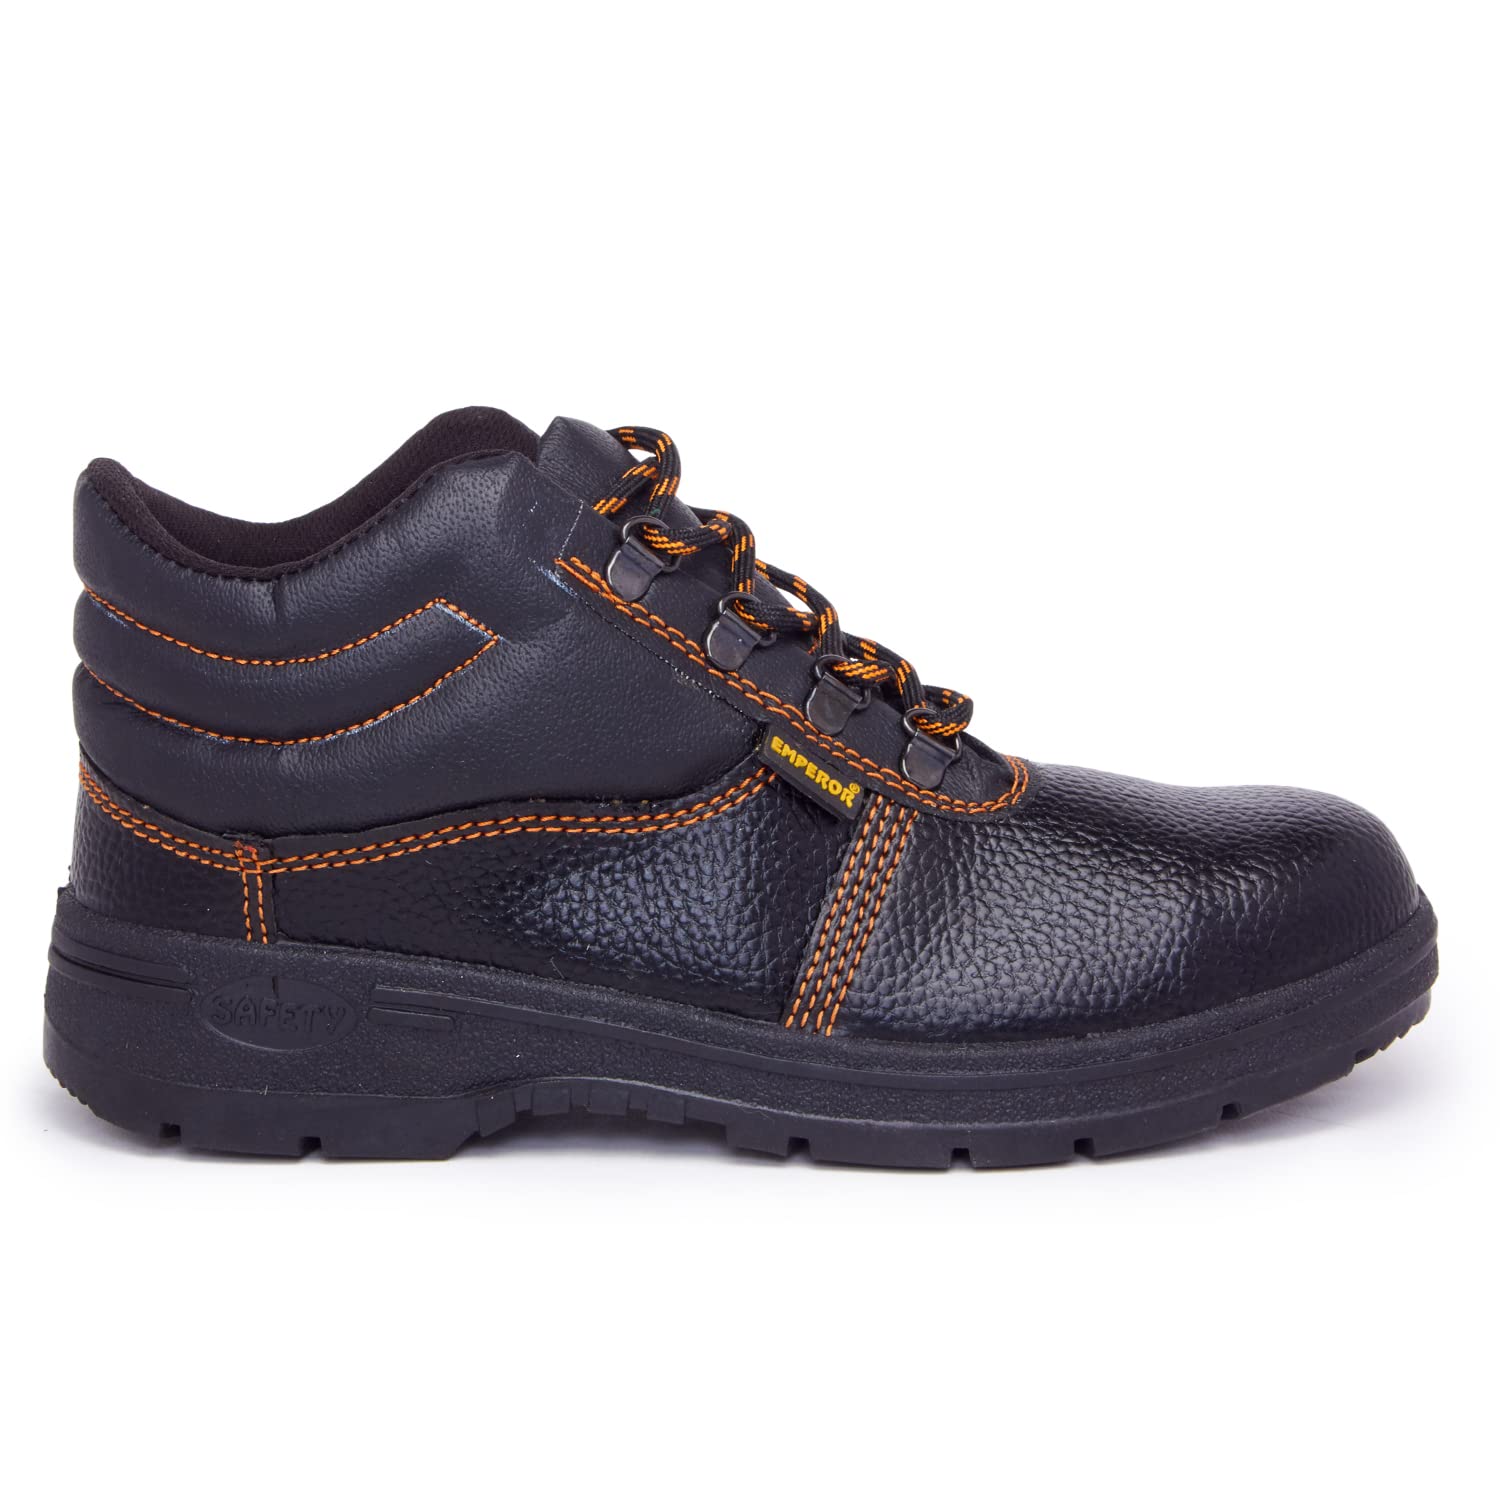 Emperor Steel Toe Leather Safety Shoe CHAMPION